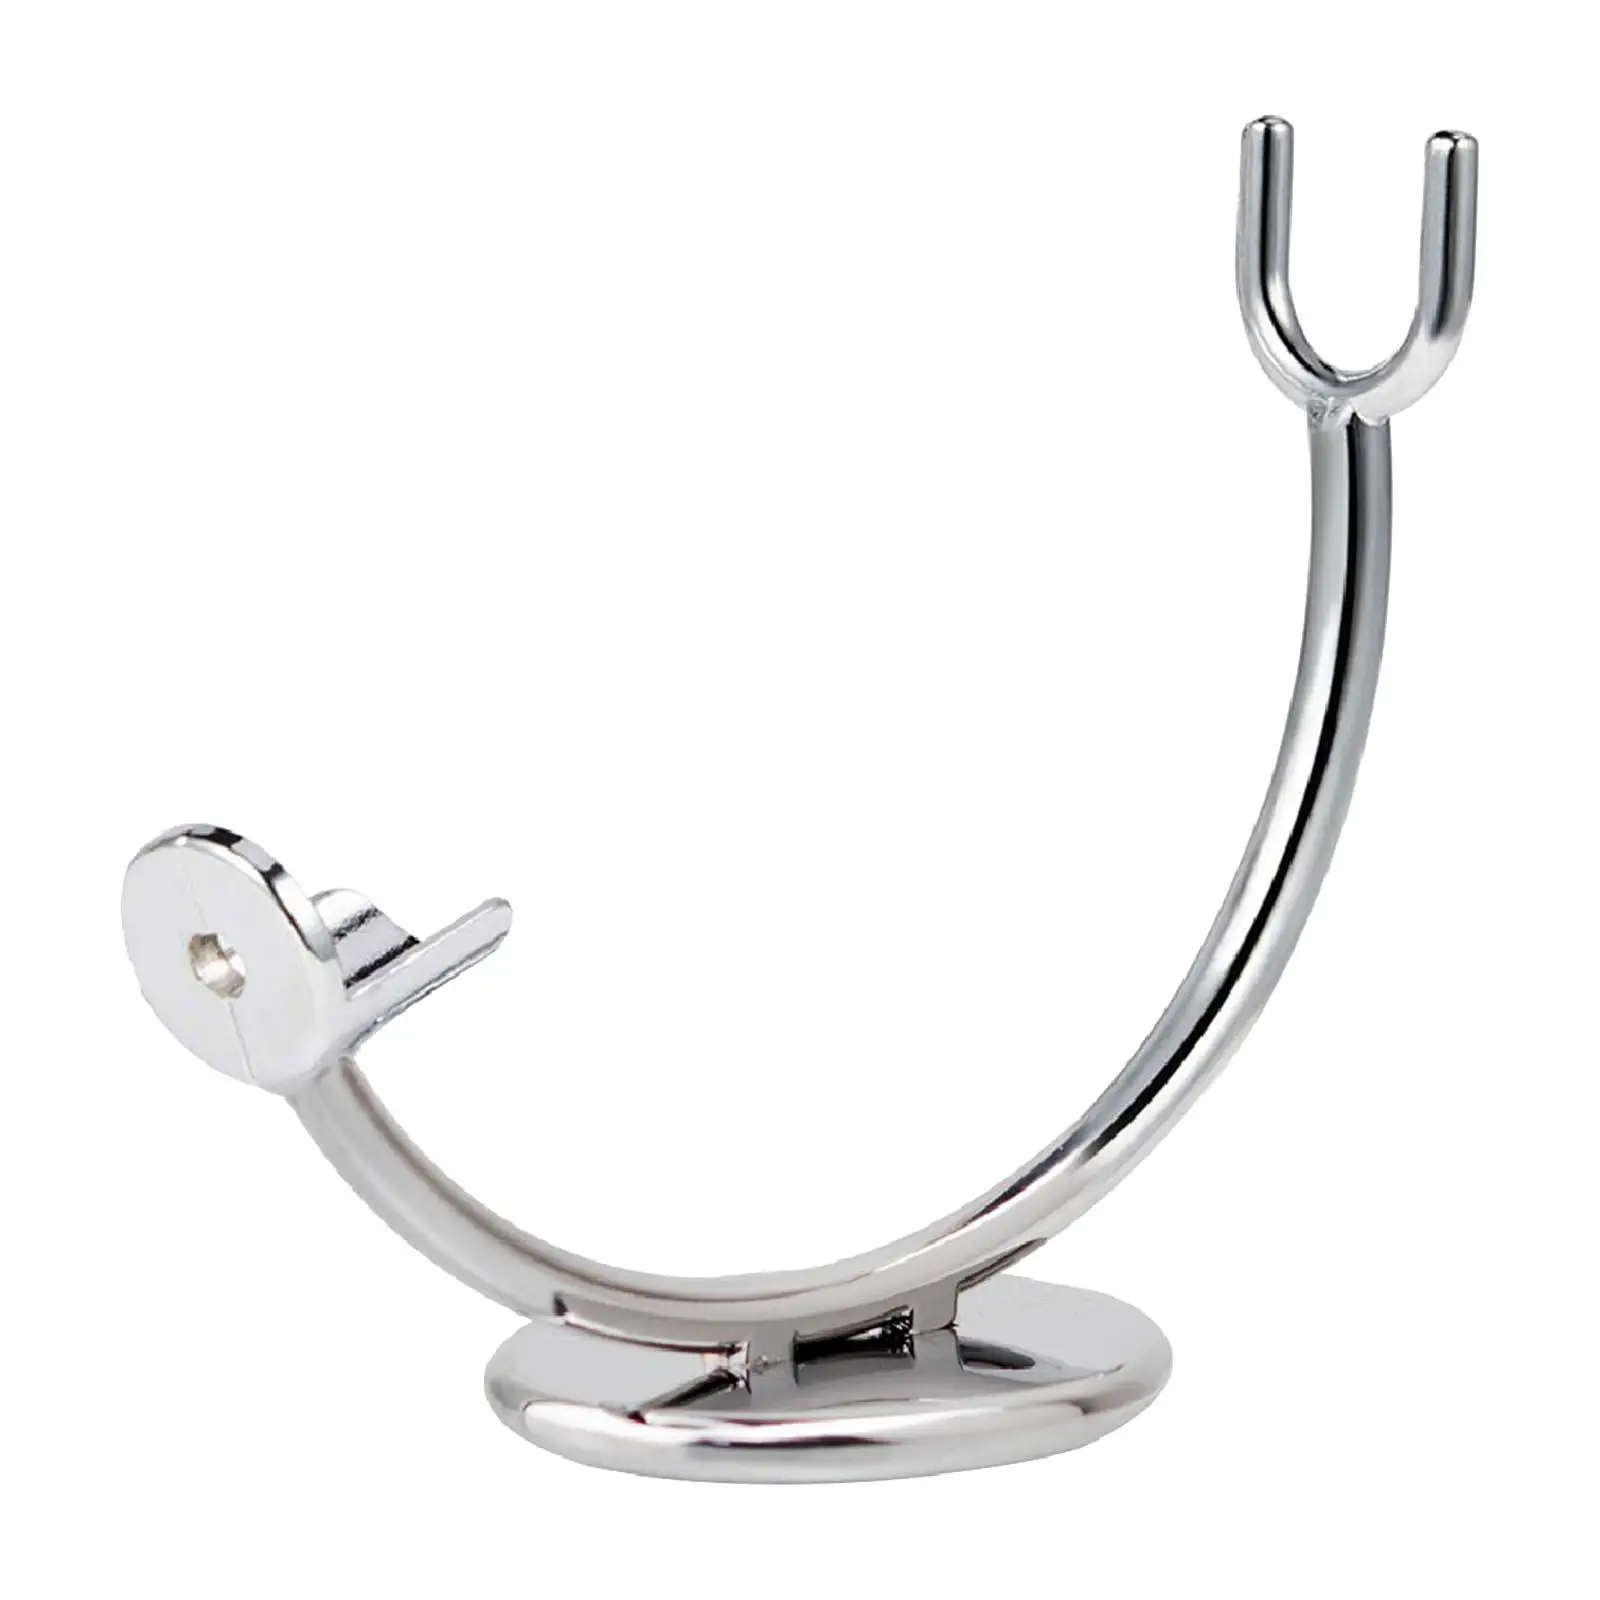 Straight Razor Stand Curved Stand Shaving Stand Anti Skid Base for Stability for Razors with Handle Length 100mm Rack Accessory